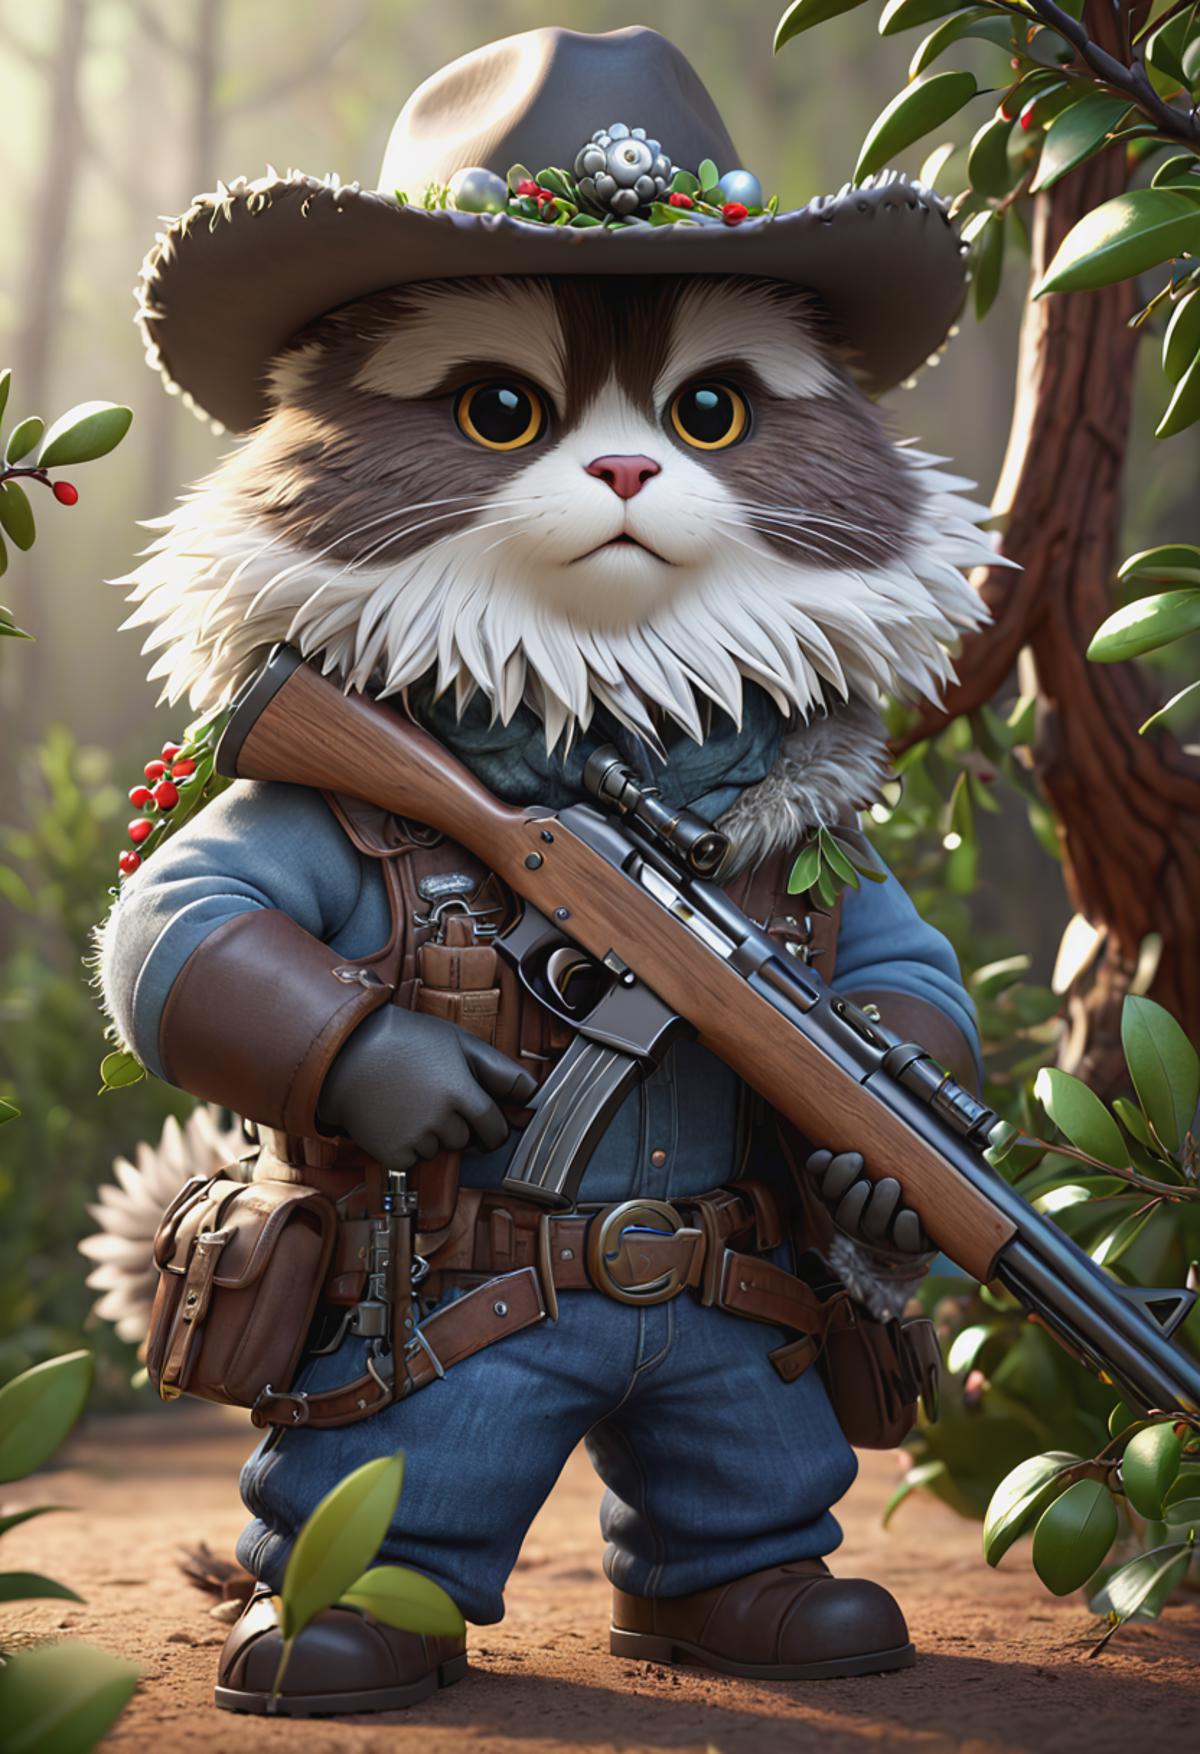 A cute, cartoon-like character dressed in a cowboy hat and holding a gun.